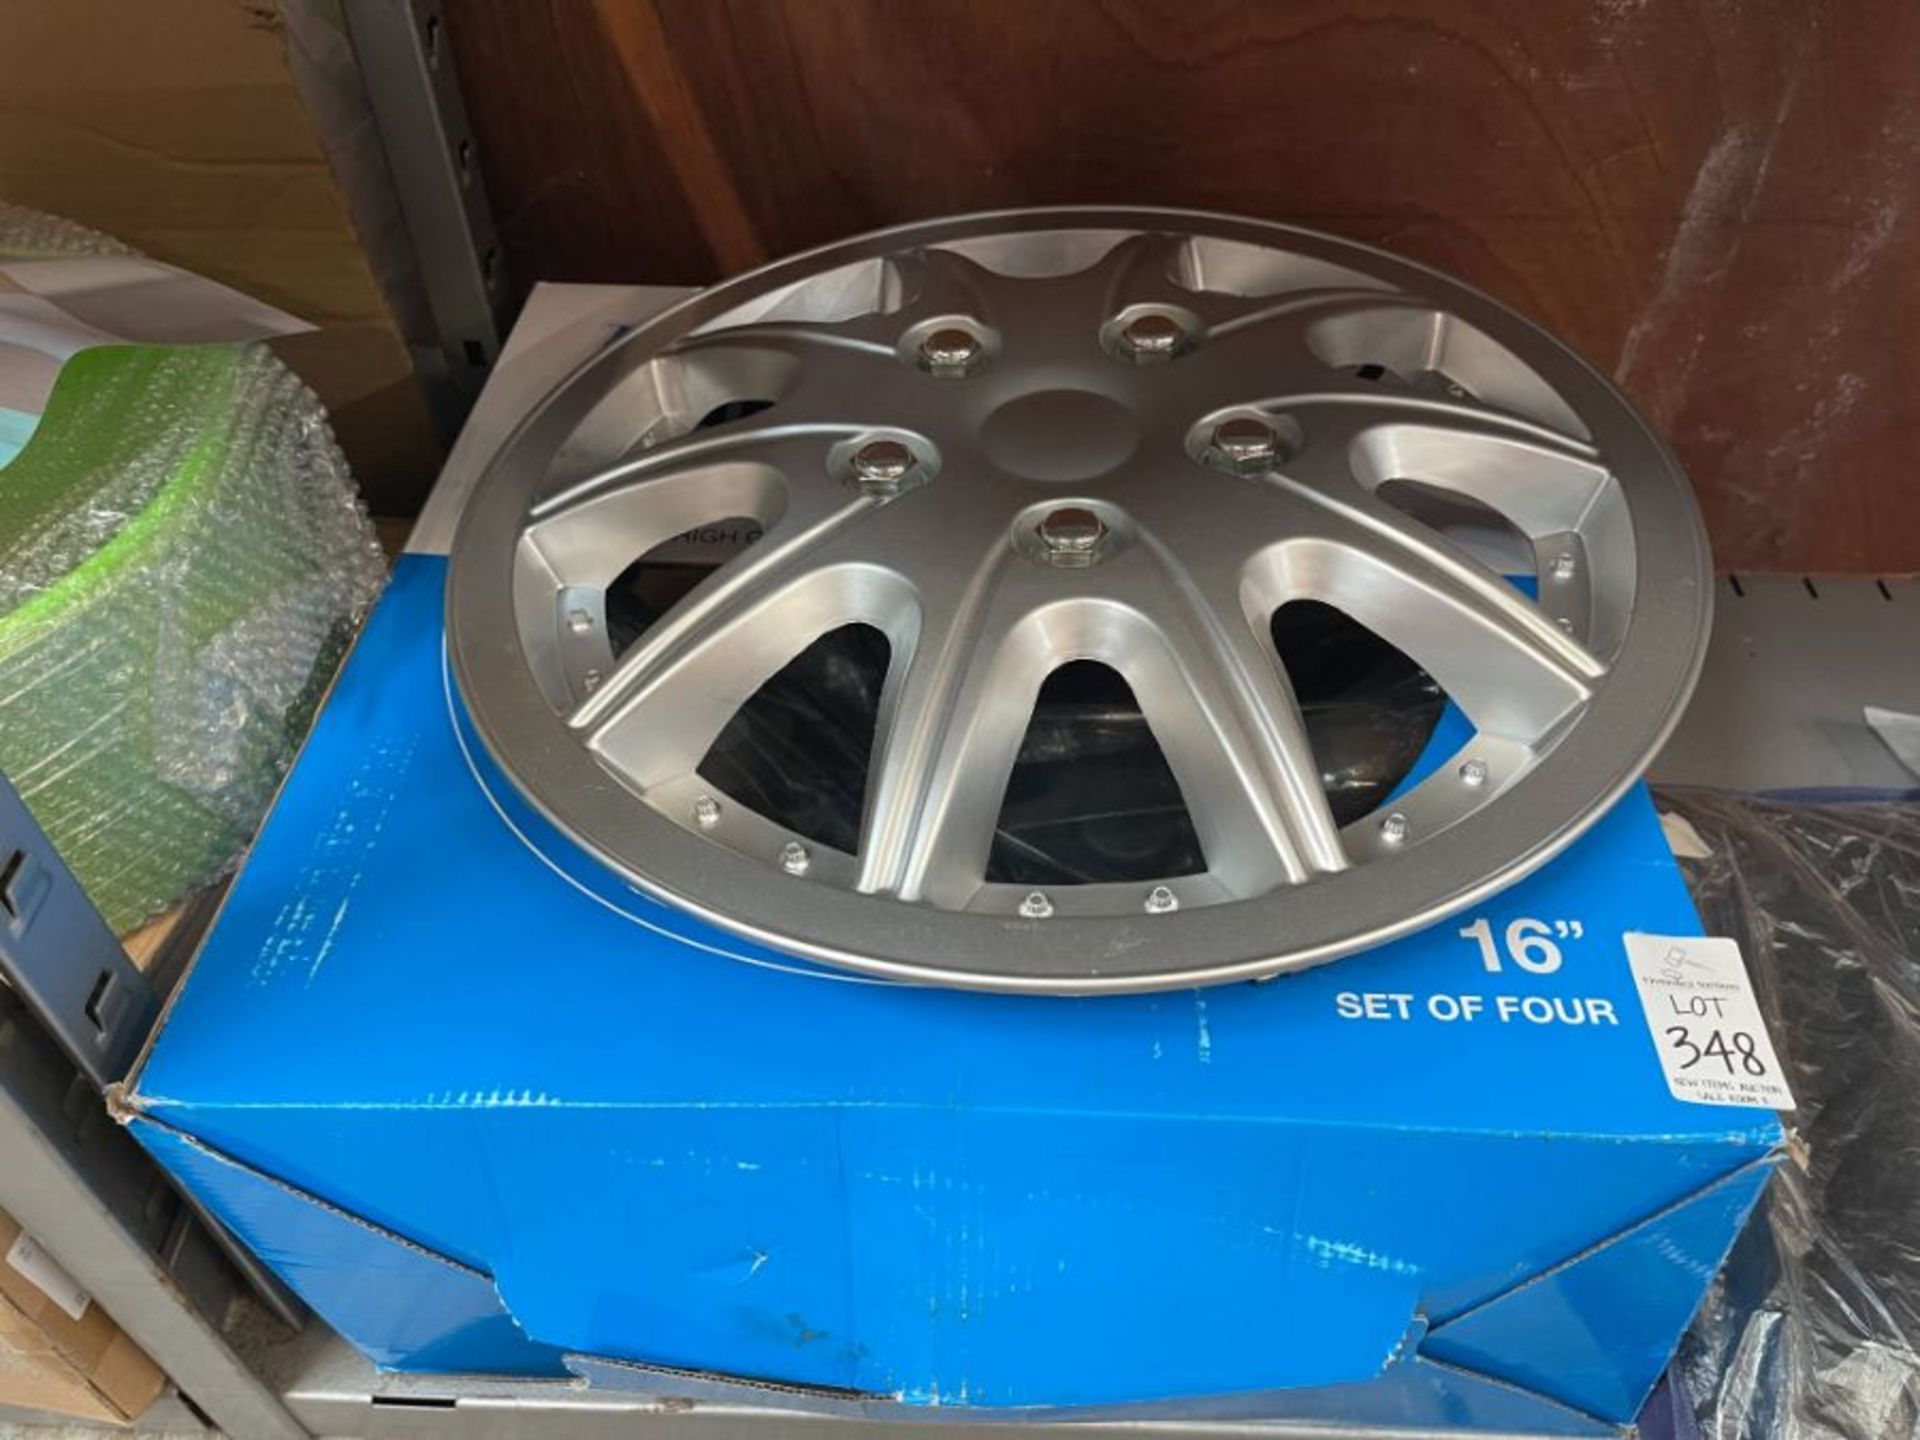 SET OF 4 16" ALLOYS SILVER (NEW)